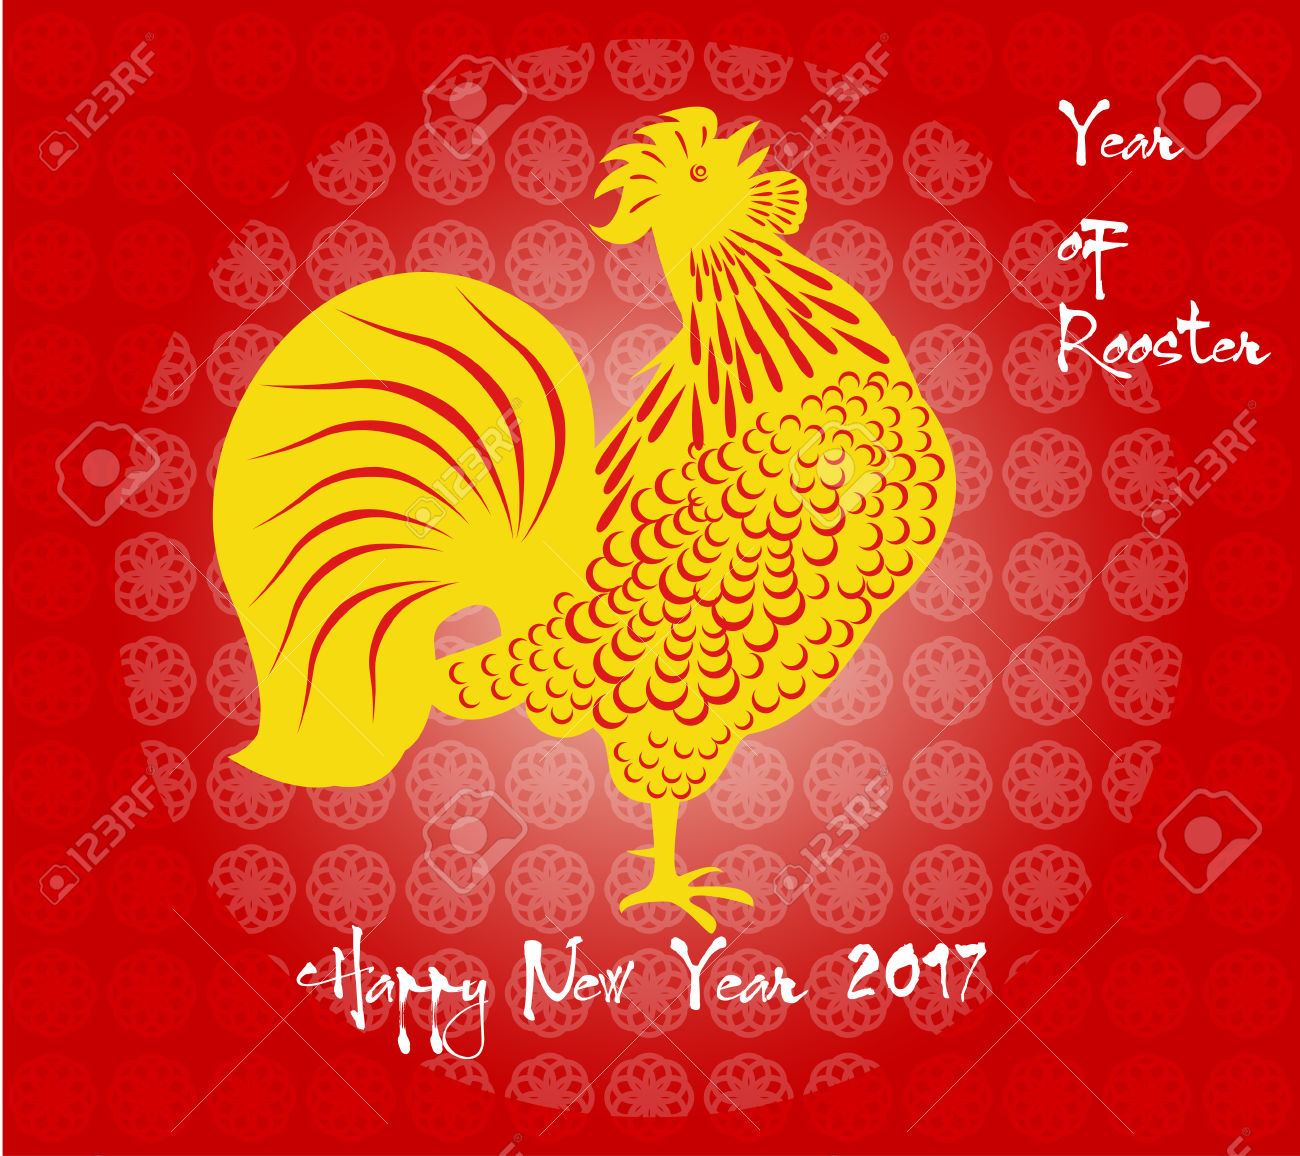 Gong Xi Fa Cai …… Happy Chinese New Year to all our customers and friends. CNY falls on 28 January 2017.